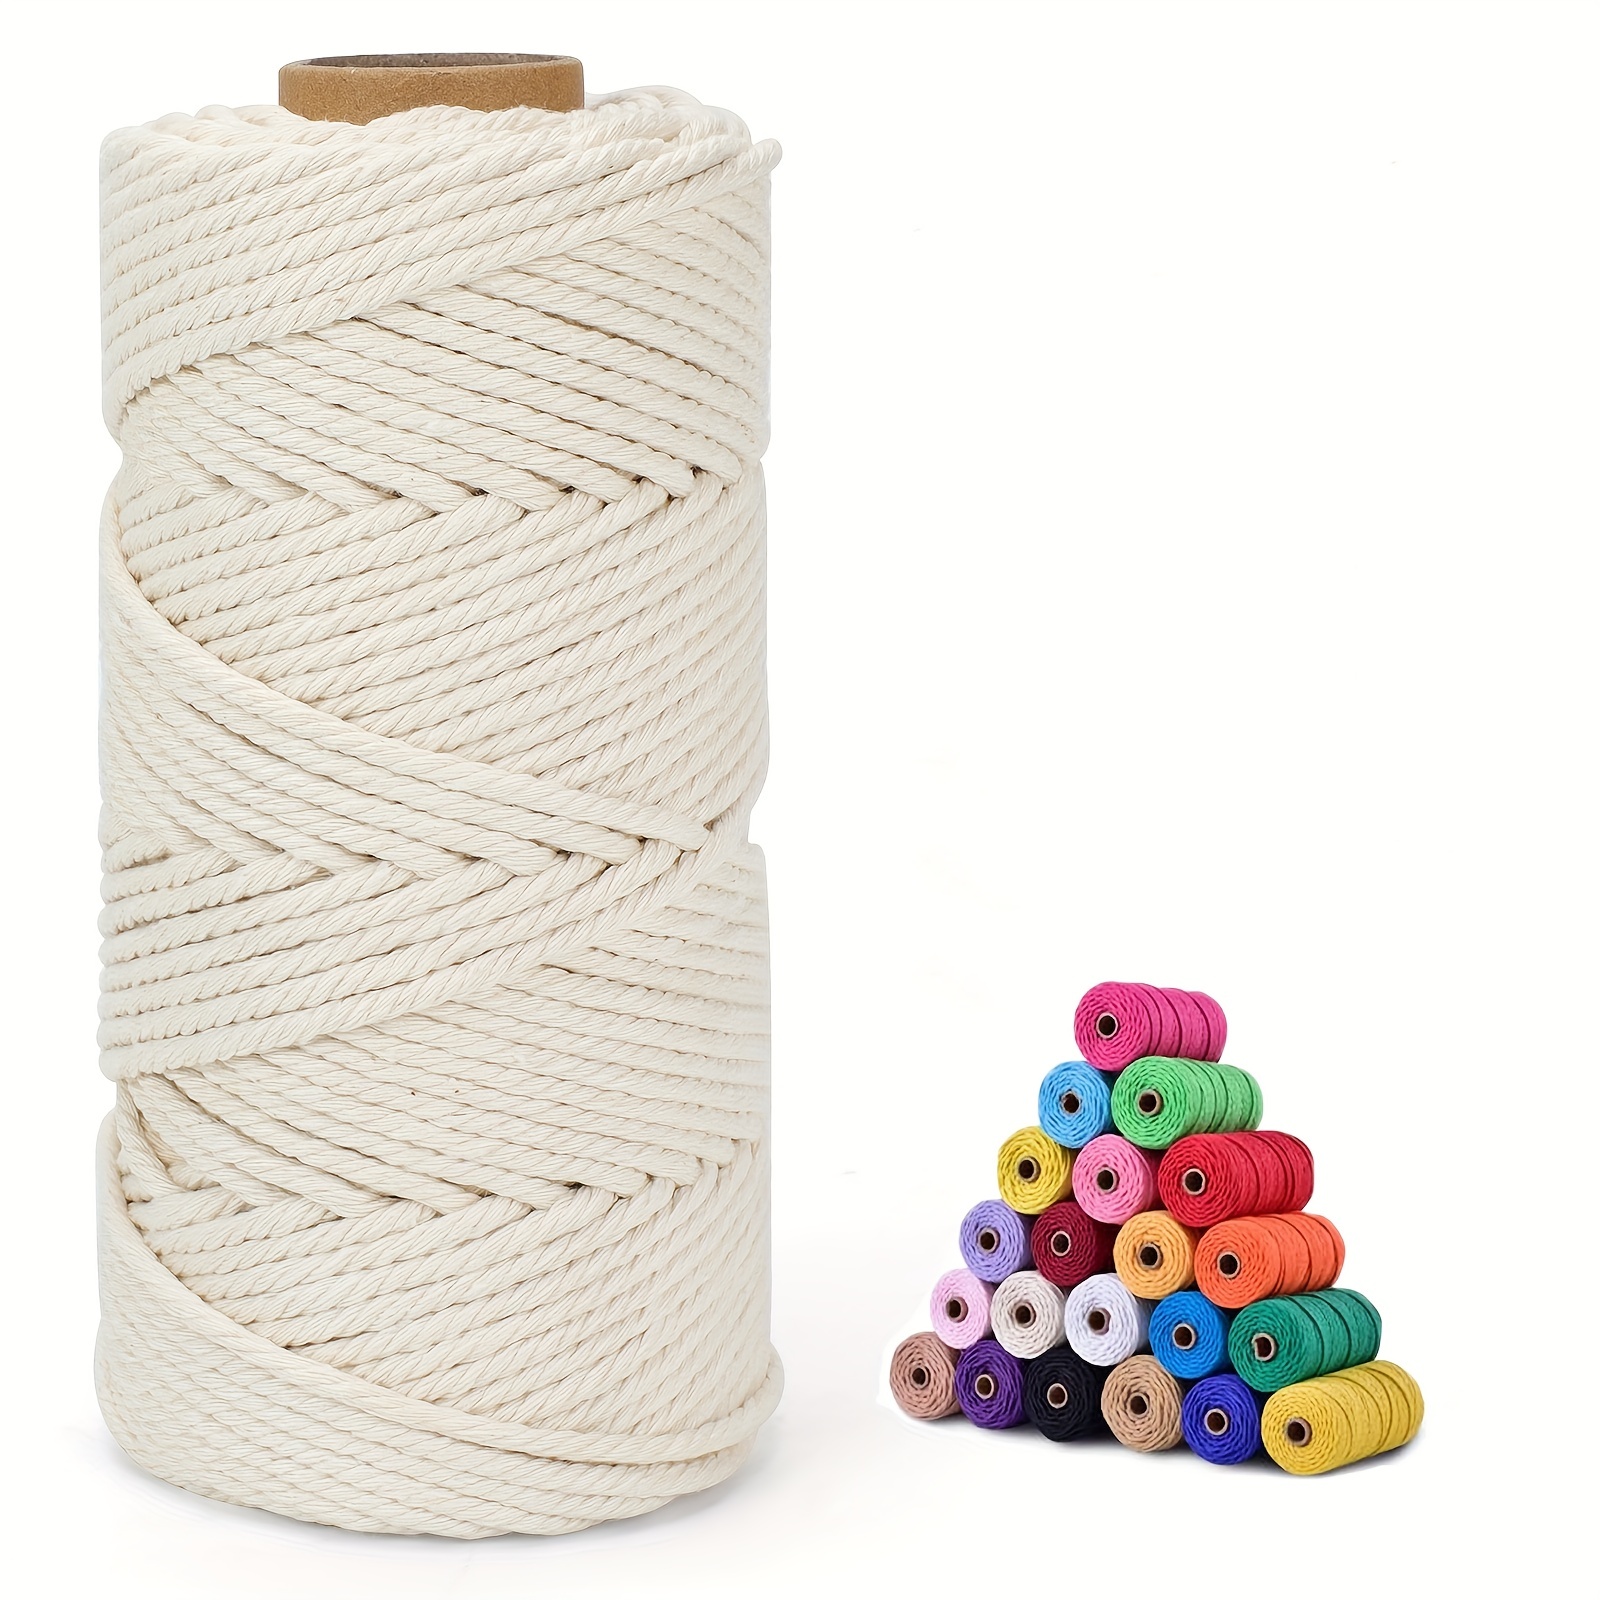 Jute Cord 3 Mm Twisted Natural Rope Yarn Tools for Crafting -  UK